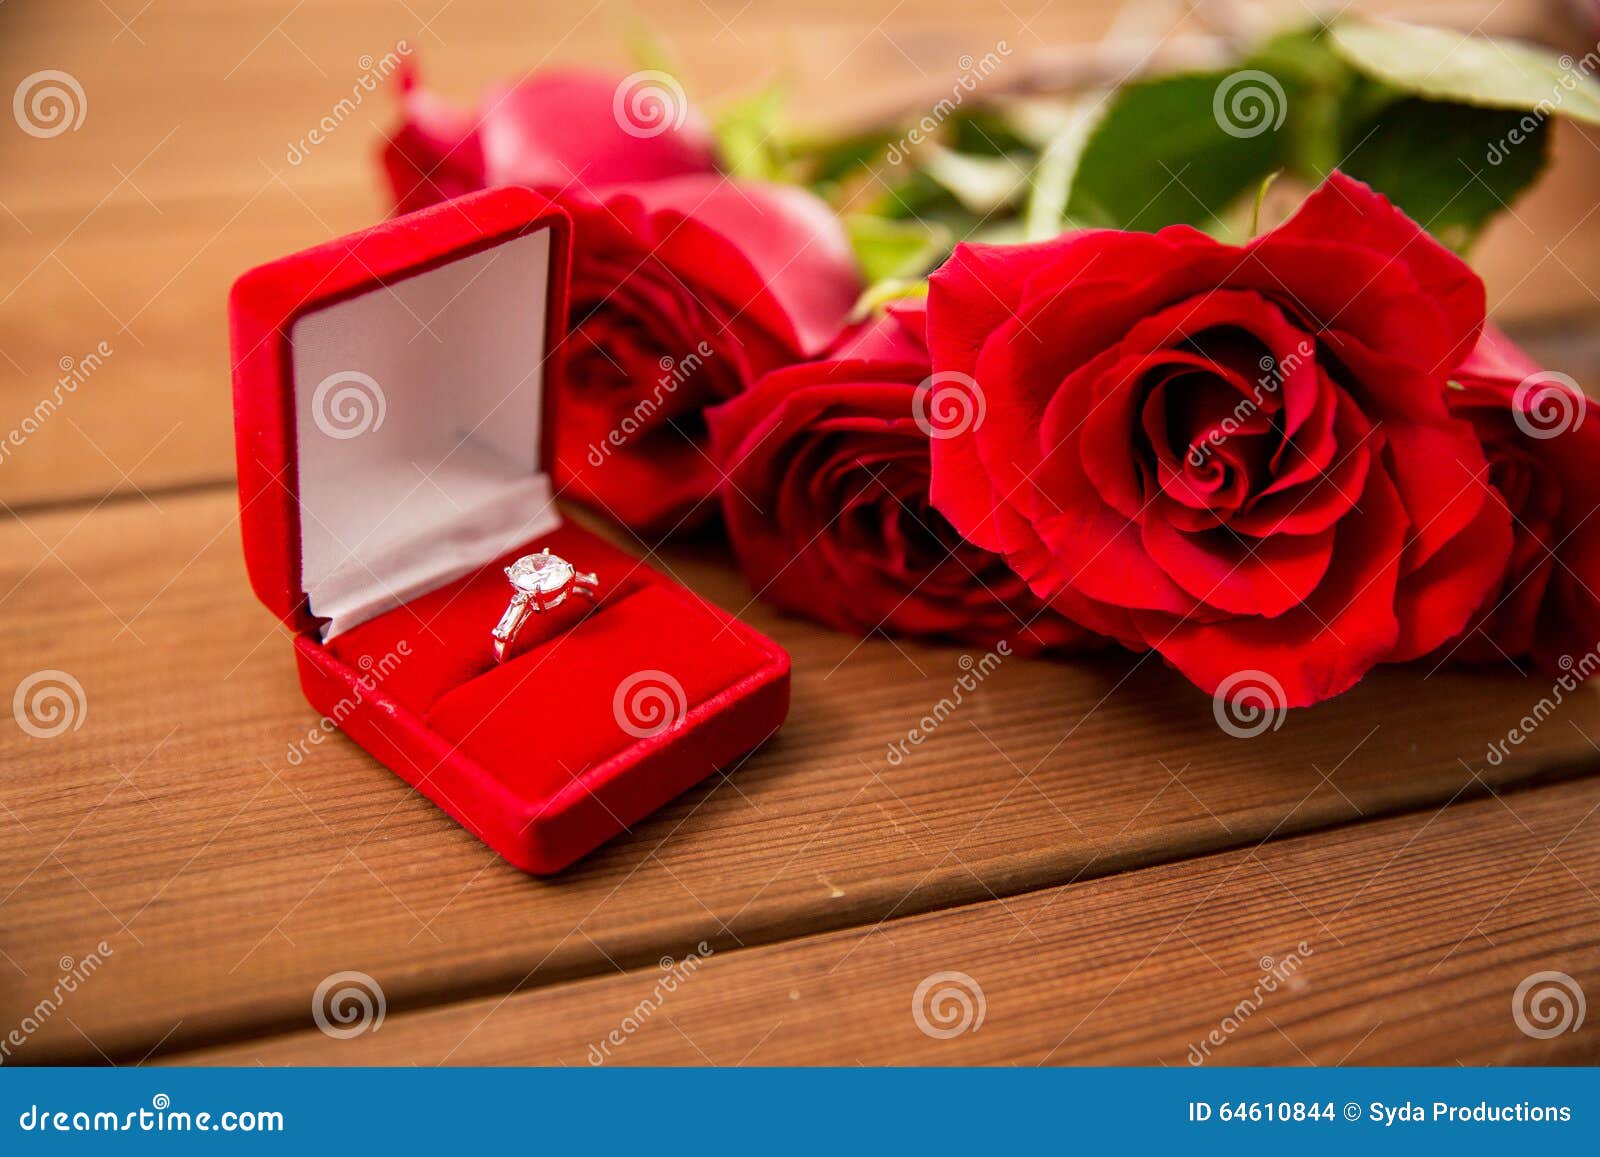 Close Up Of Diamond Engagement Ring And Red Roses Stock Photo - Image 